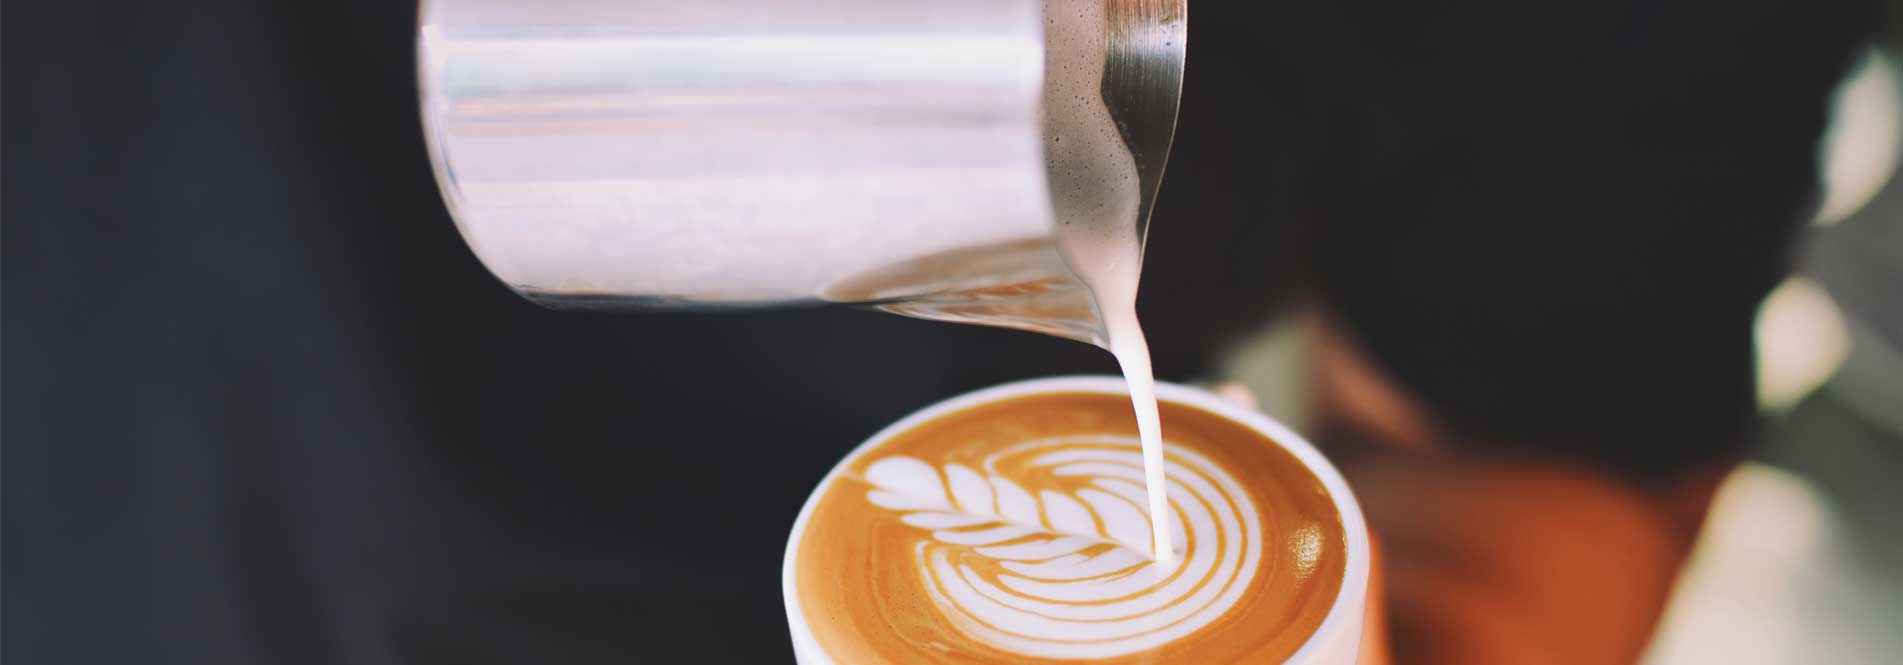 5 DAY PROFITABLE AND BUSY COFFEE SHOP IN PARRAMATTA(1047)